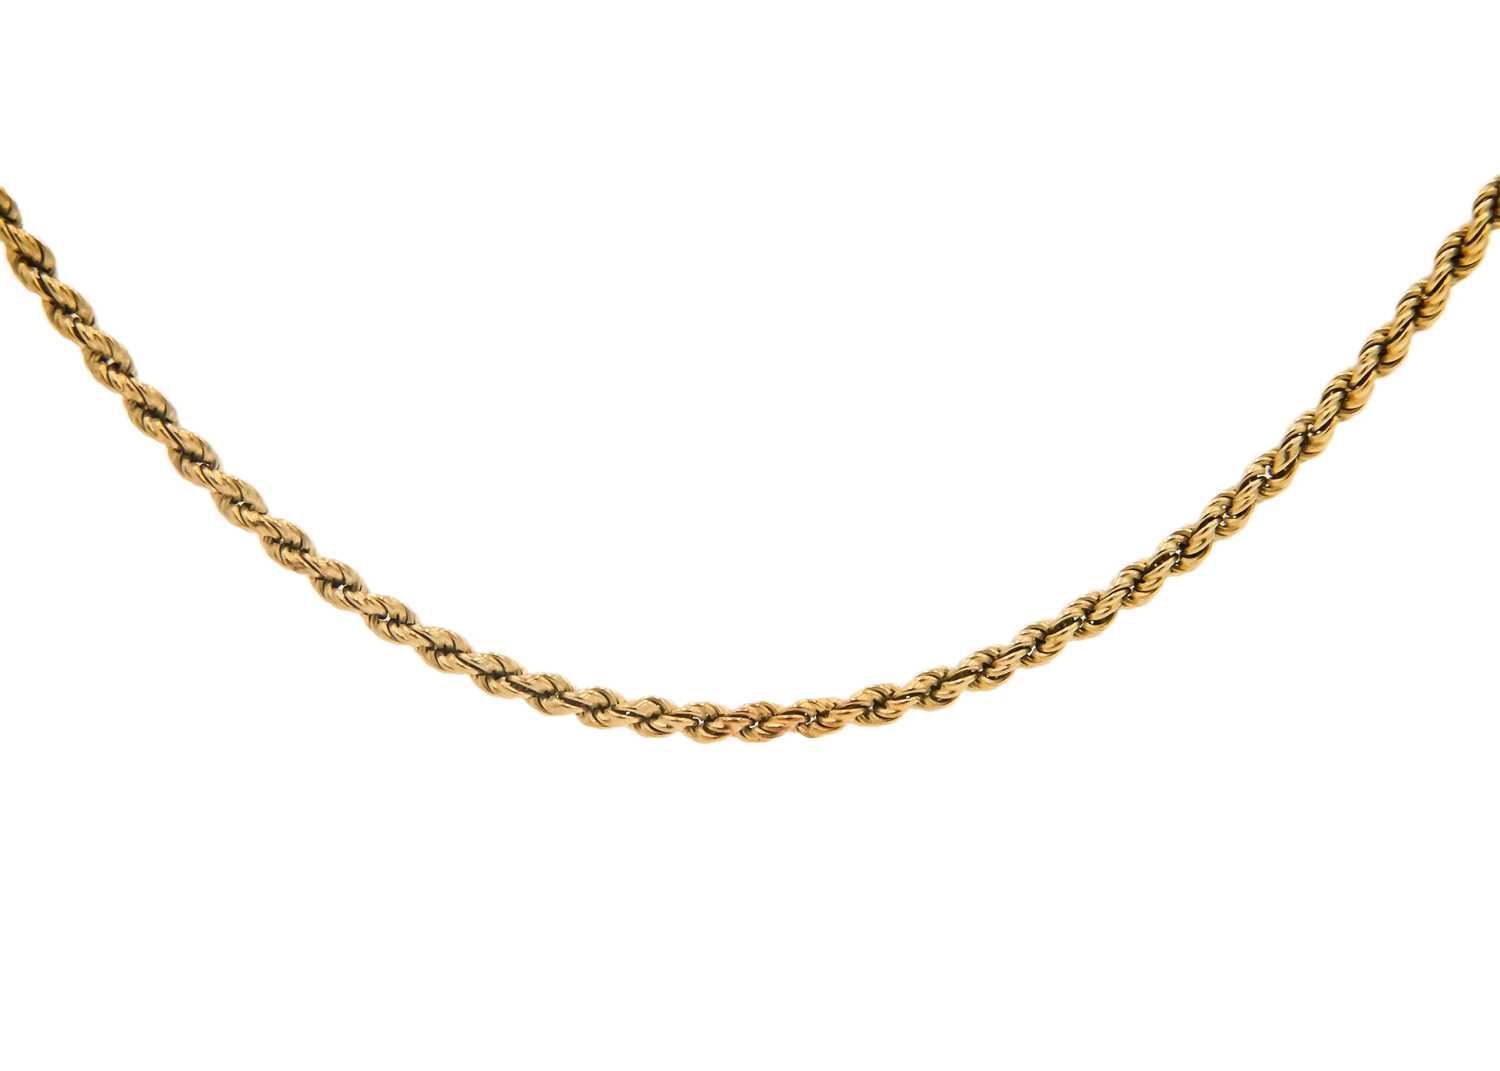 An 18ct rope-twist necklace.